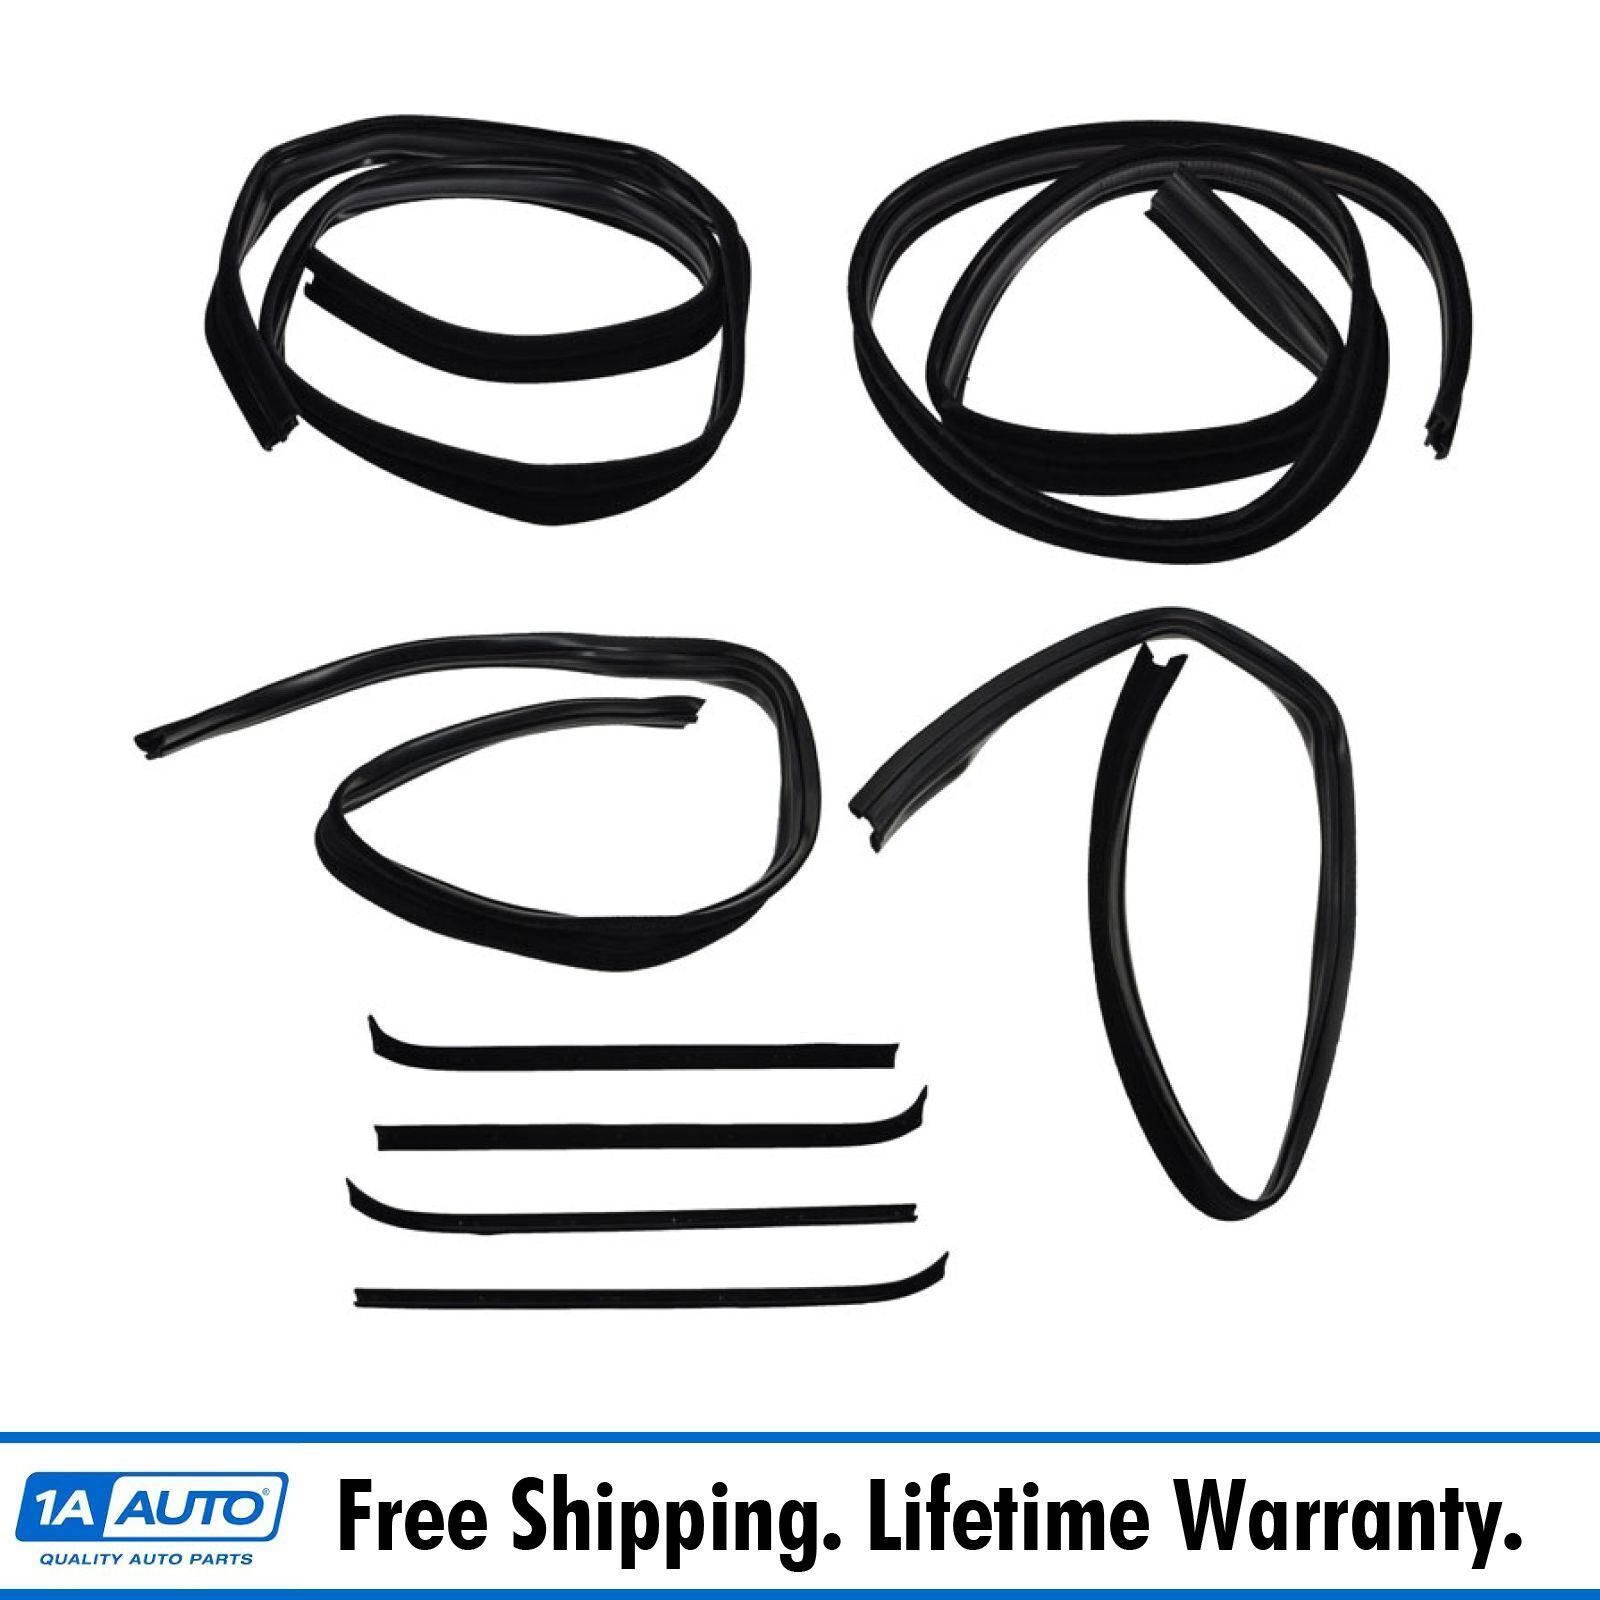 Window Sweep/Run Channel Weatherstrip Seal Set for Ford Bronco Pickup Truck F150